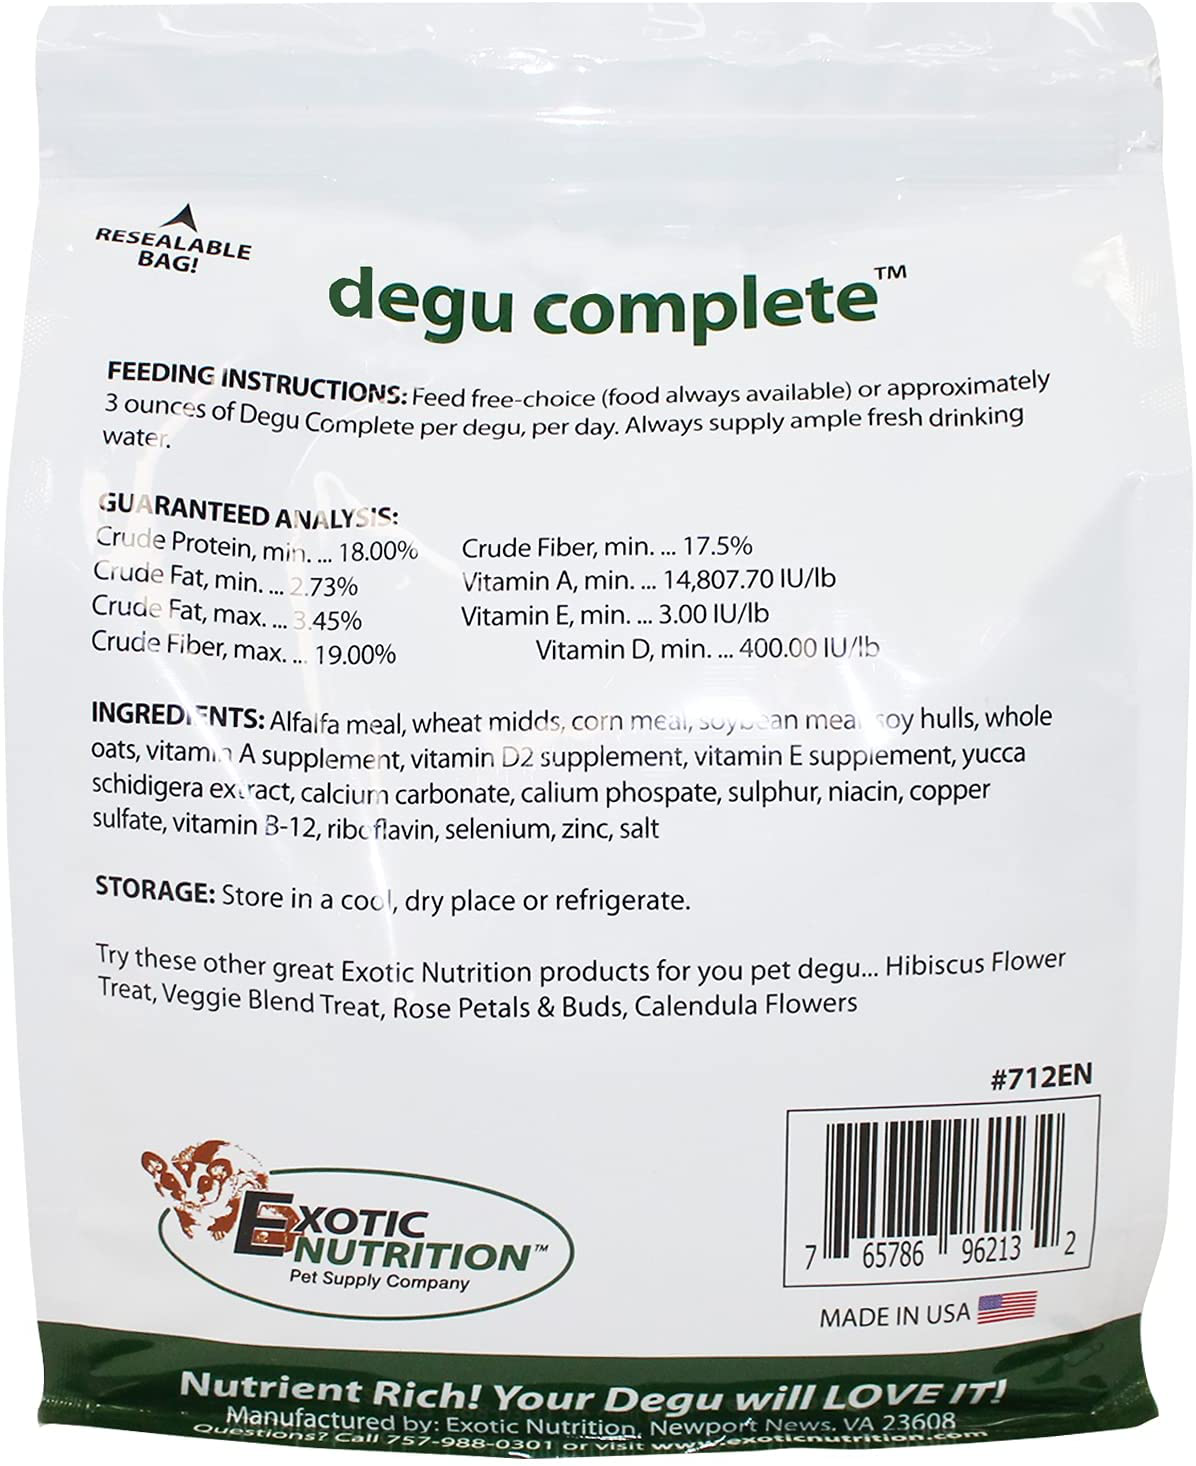 Exotic Nutrition Degu Complete - Nutritionally Complete Healthy Pellet Diet with Whole Oats - for Domesticated Pet Degus